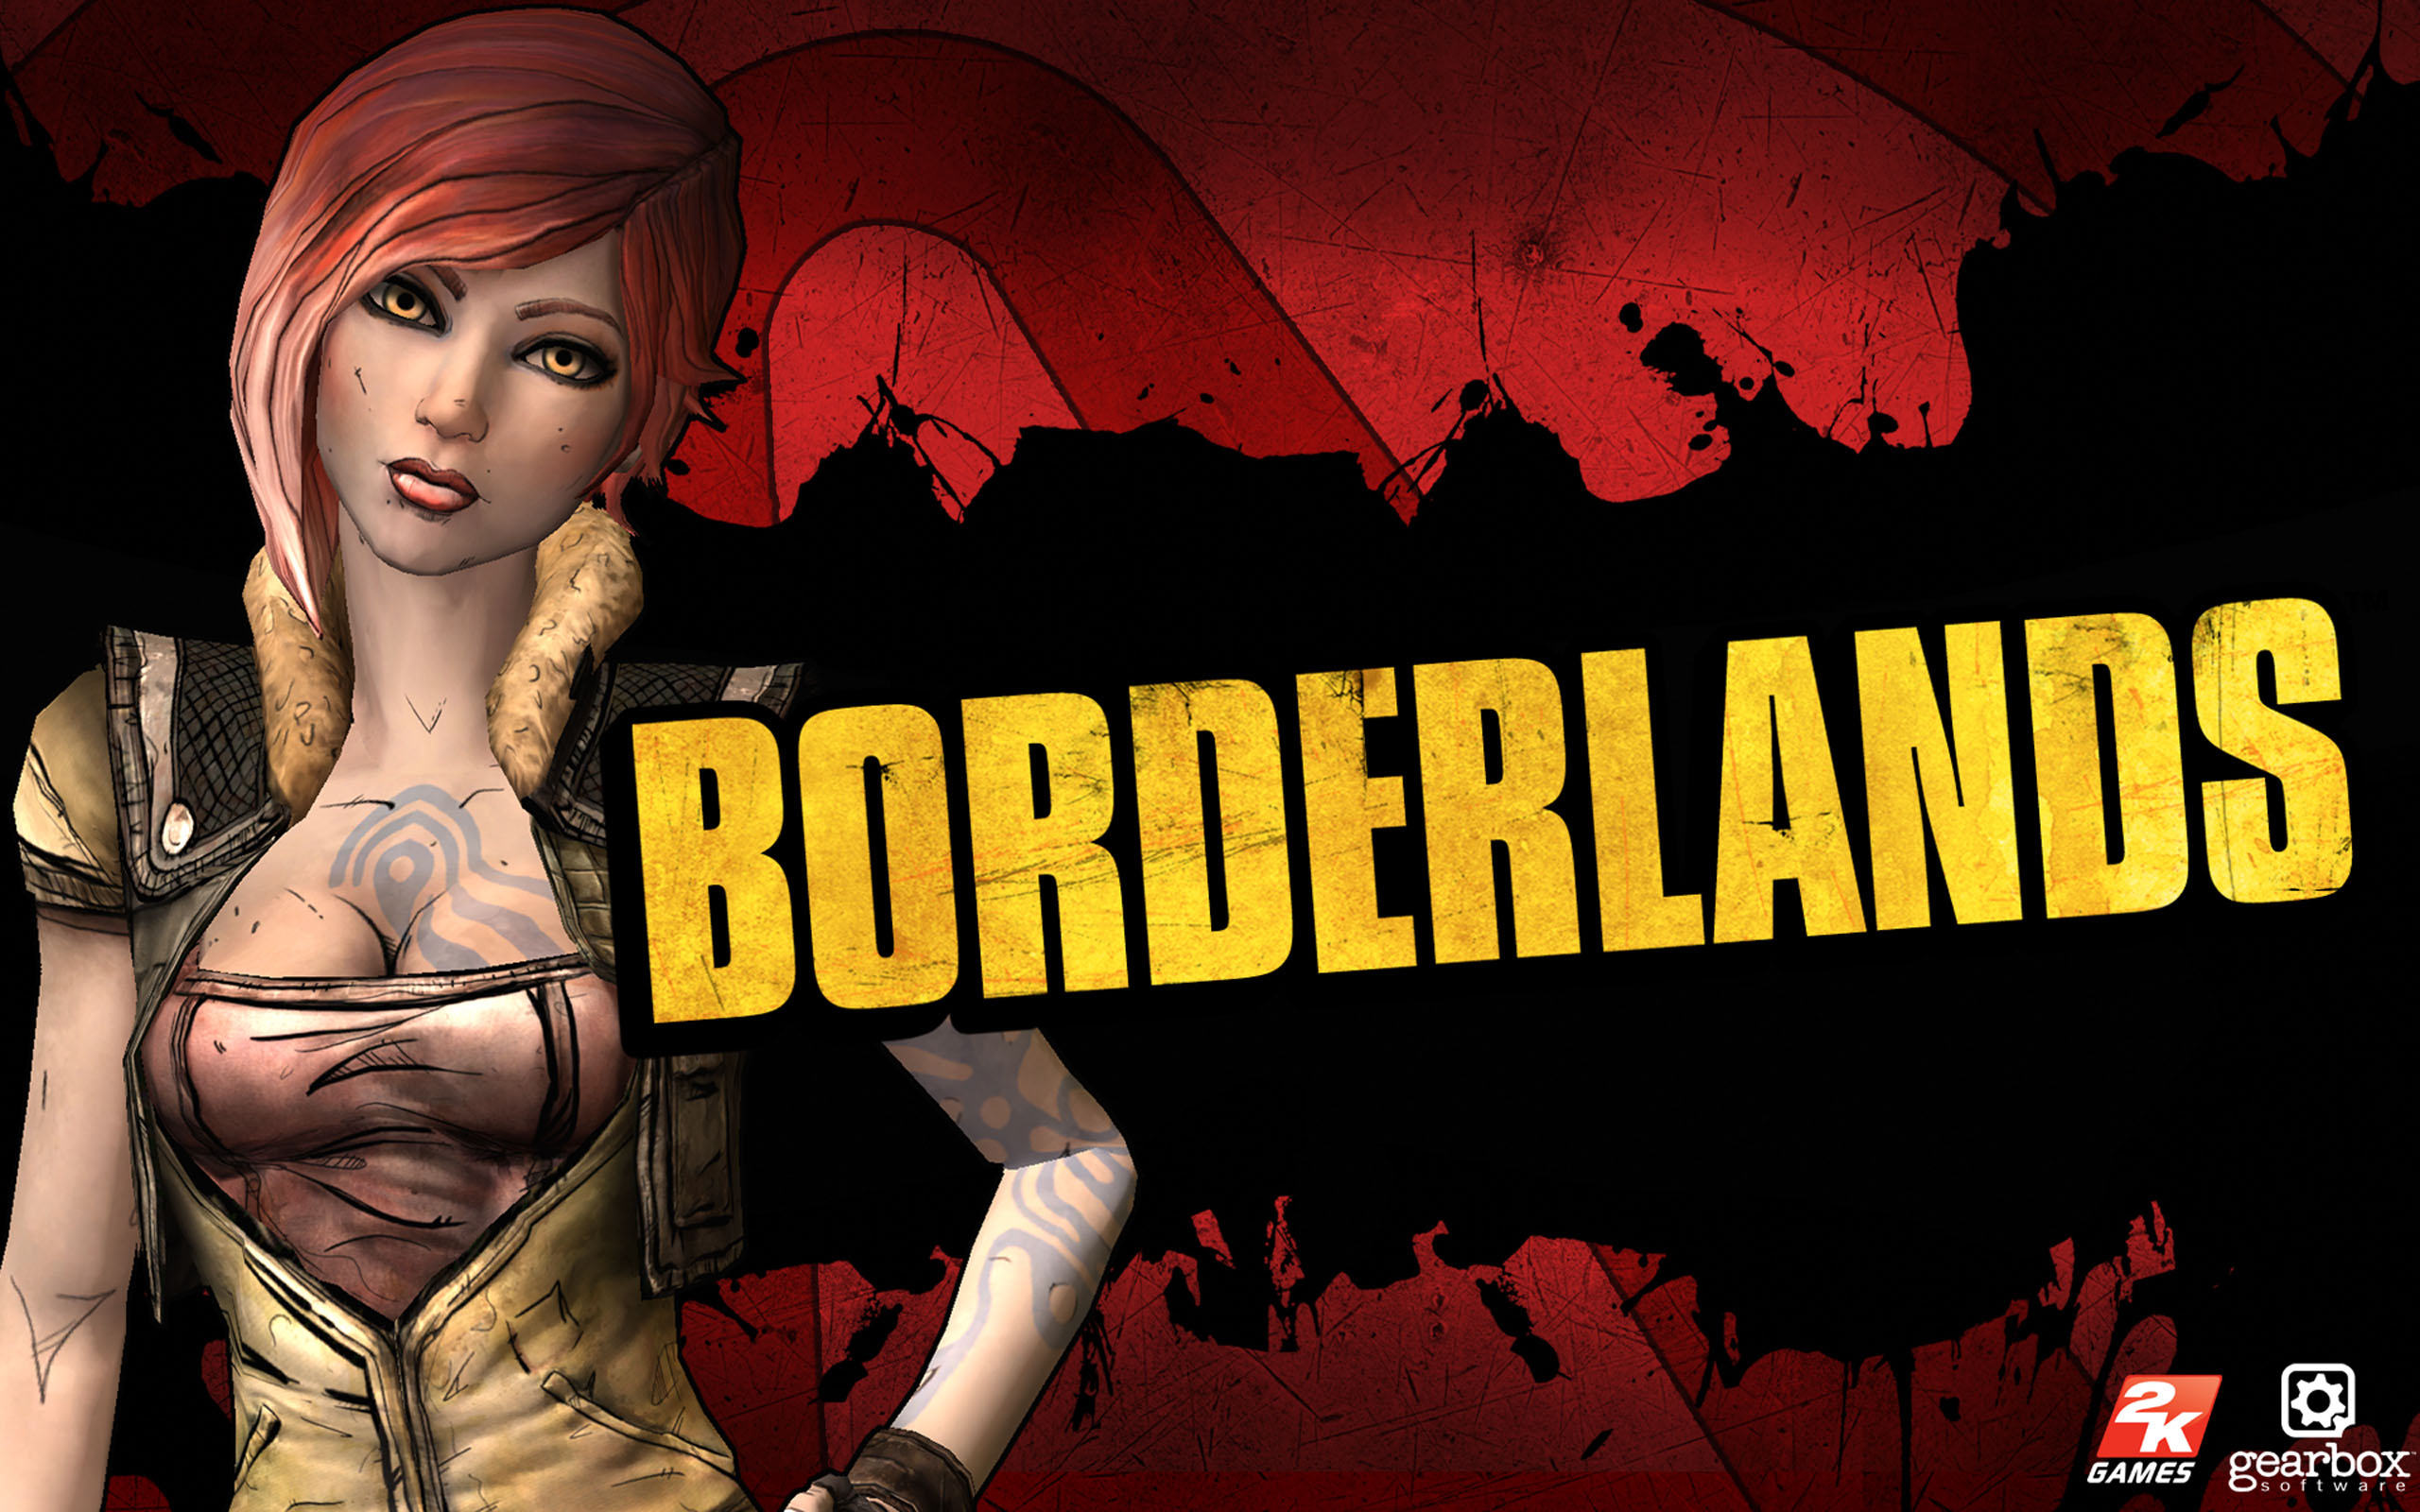 lilith-from-the-borderlands-series-game-art-hq